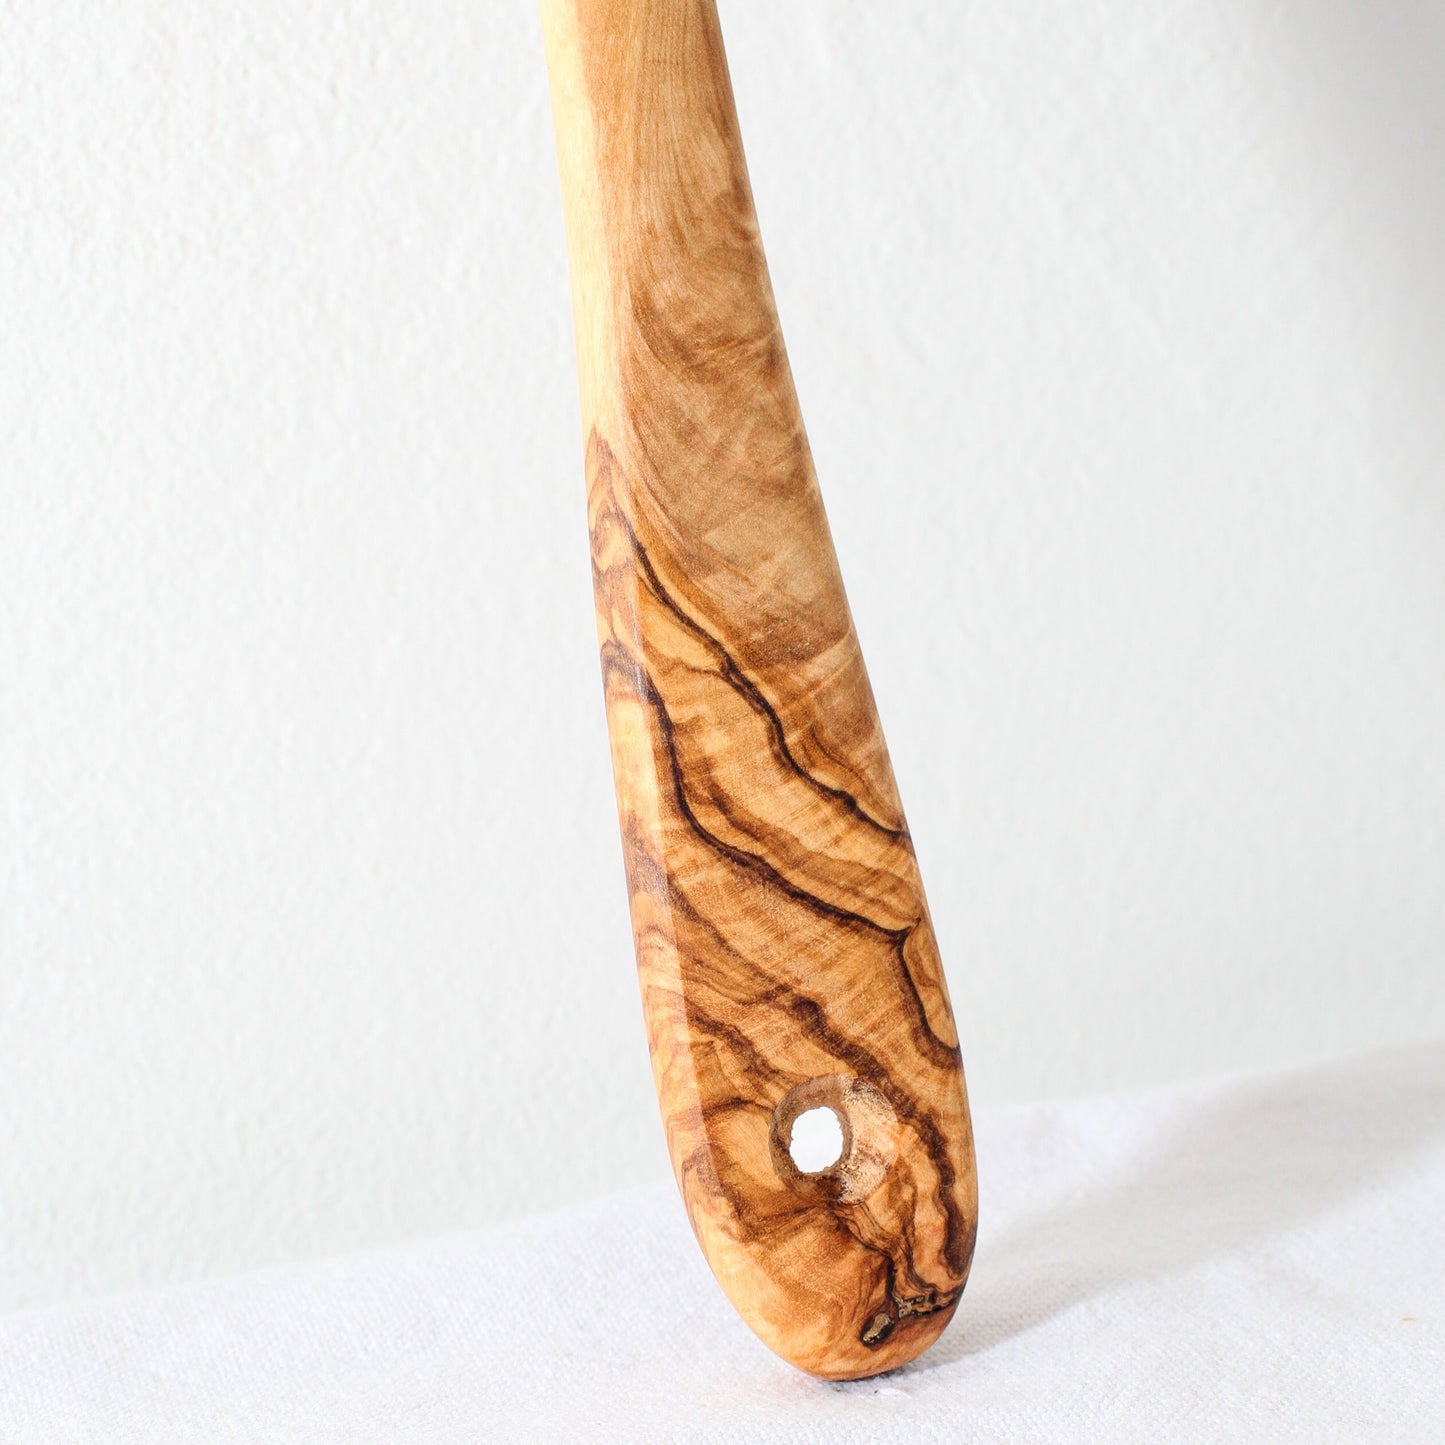 bottom of an olive wood kitchen spoon